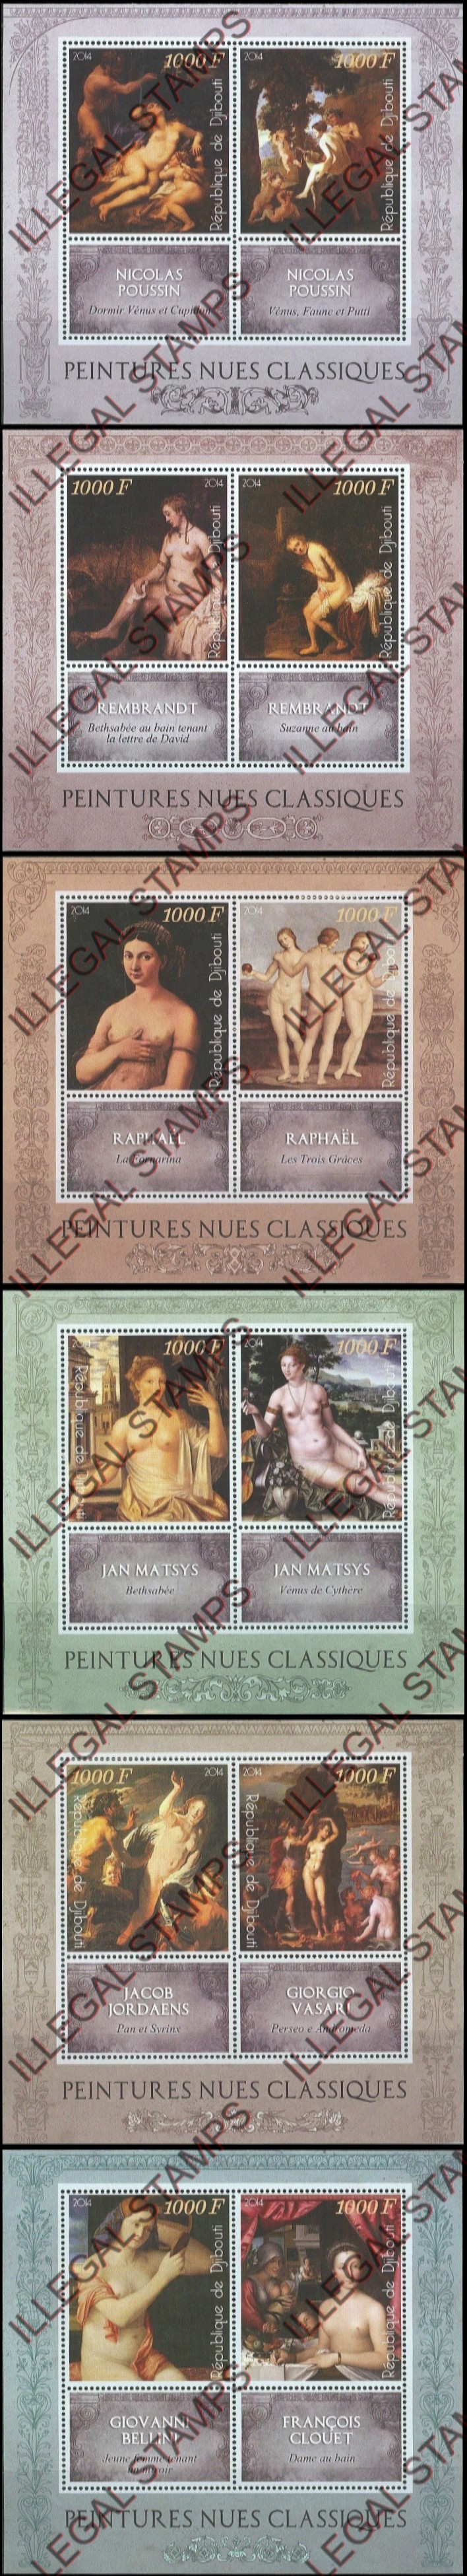 Djibouti 2014 Classic Nude Paintings Illegal Stamp Souvenir Sheets of 2